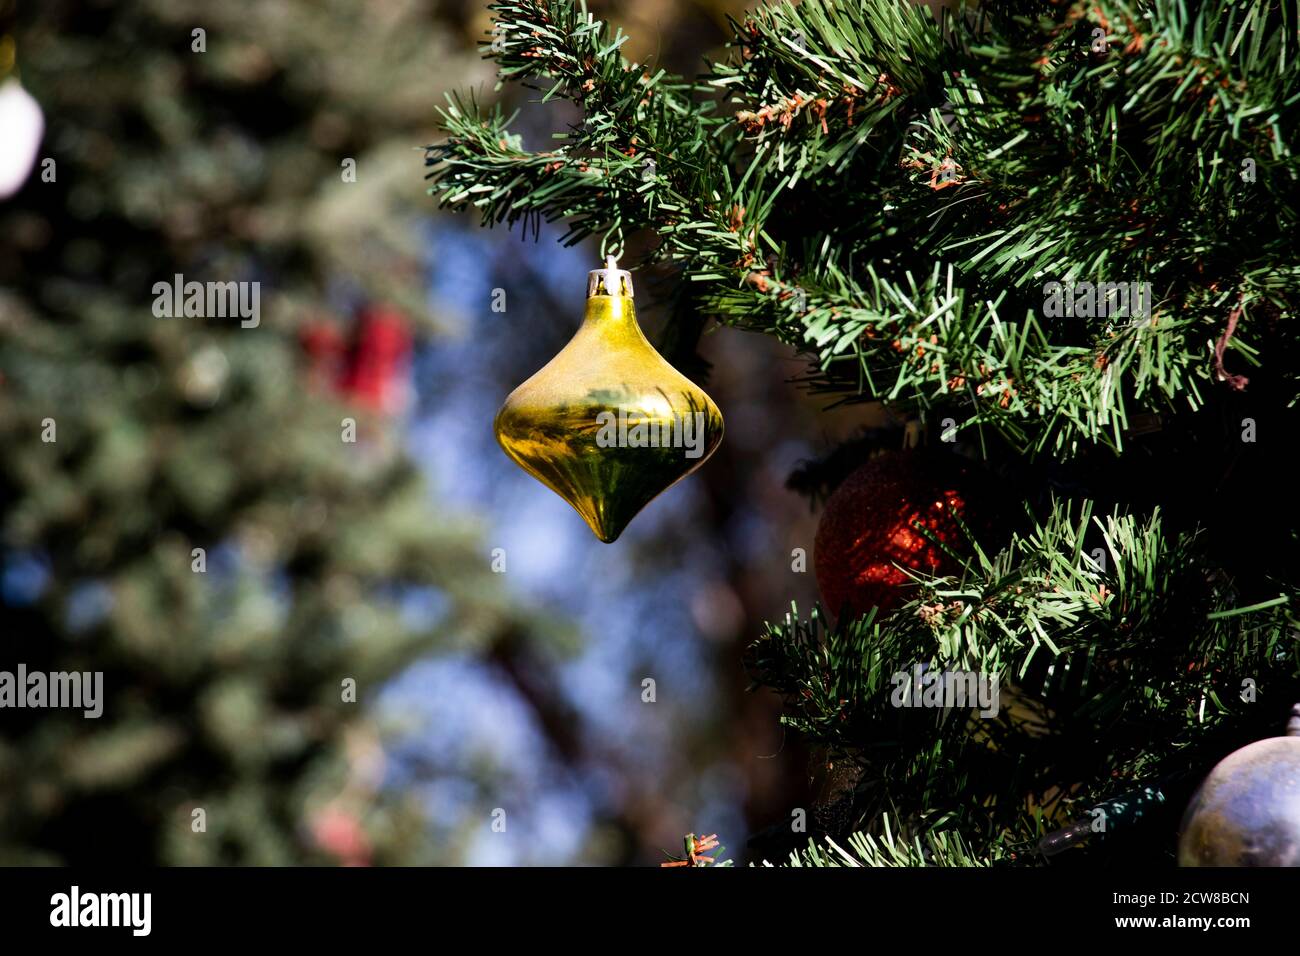 Decorated Christmas tree on blurred background. X'mas, happy holiday, decoration concepts. Shallow depth of field. Stock Photo